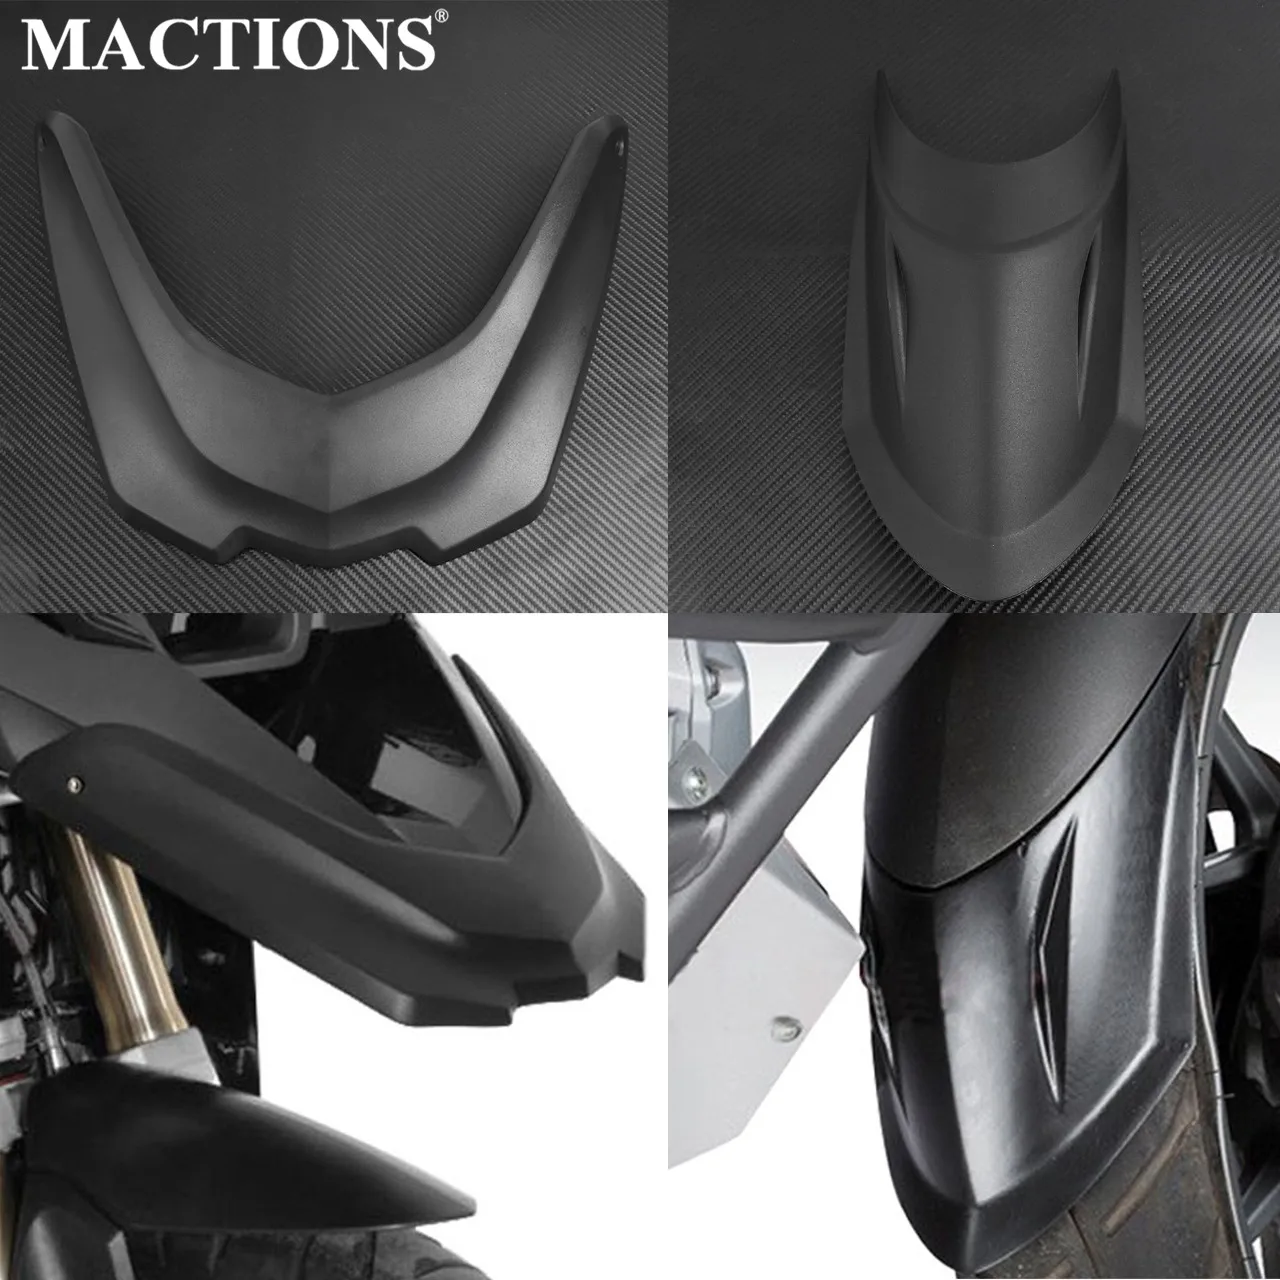 Black Modified Rear Fender Mudguard Kit for BMW R1200GS/LC/Adventure 2013-2016